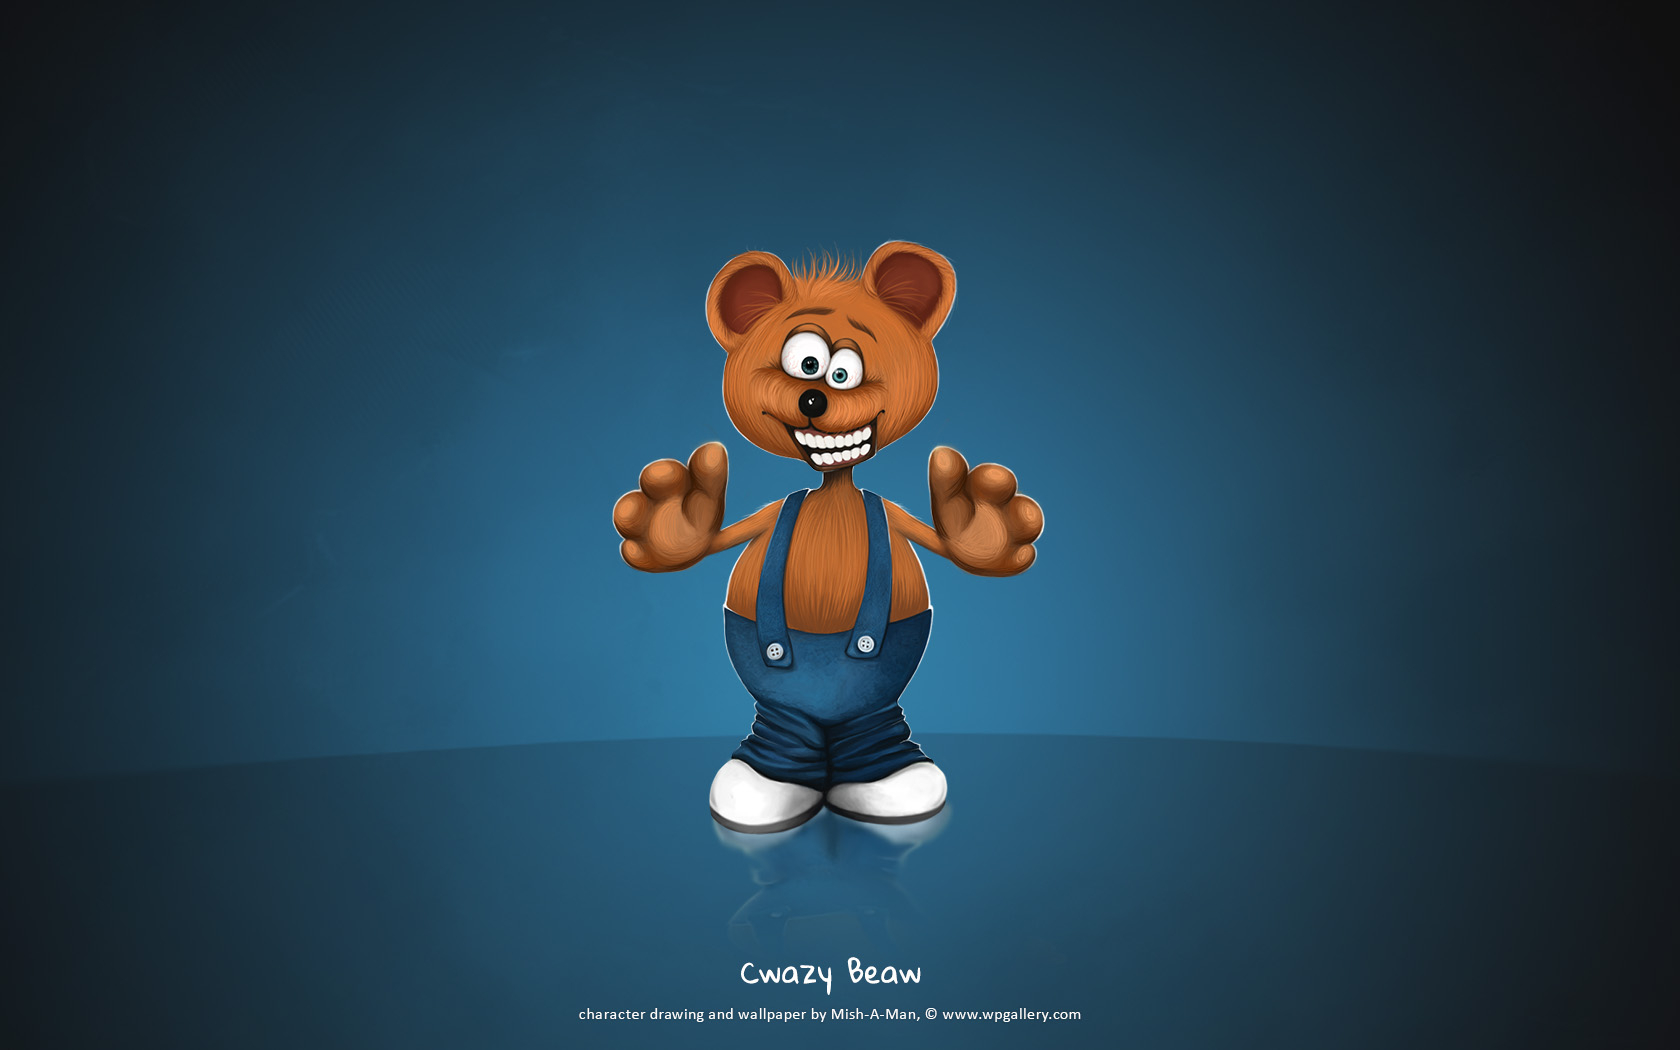 Cwazy Beaw for 1680 x 1050 widescreen resolution